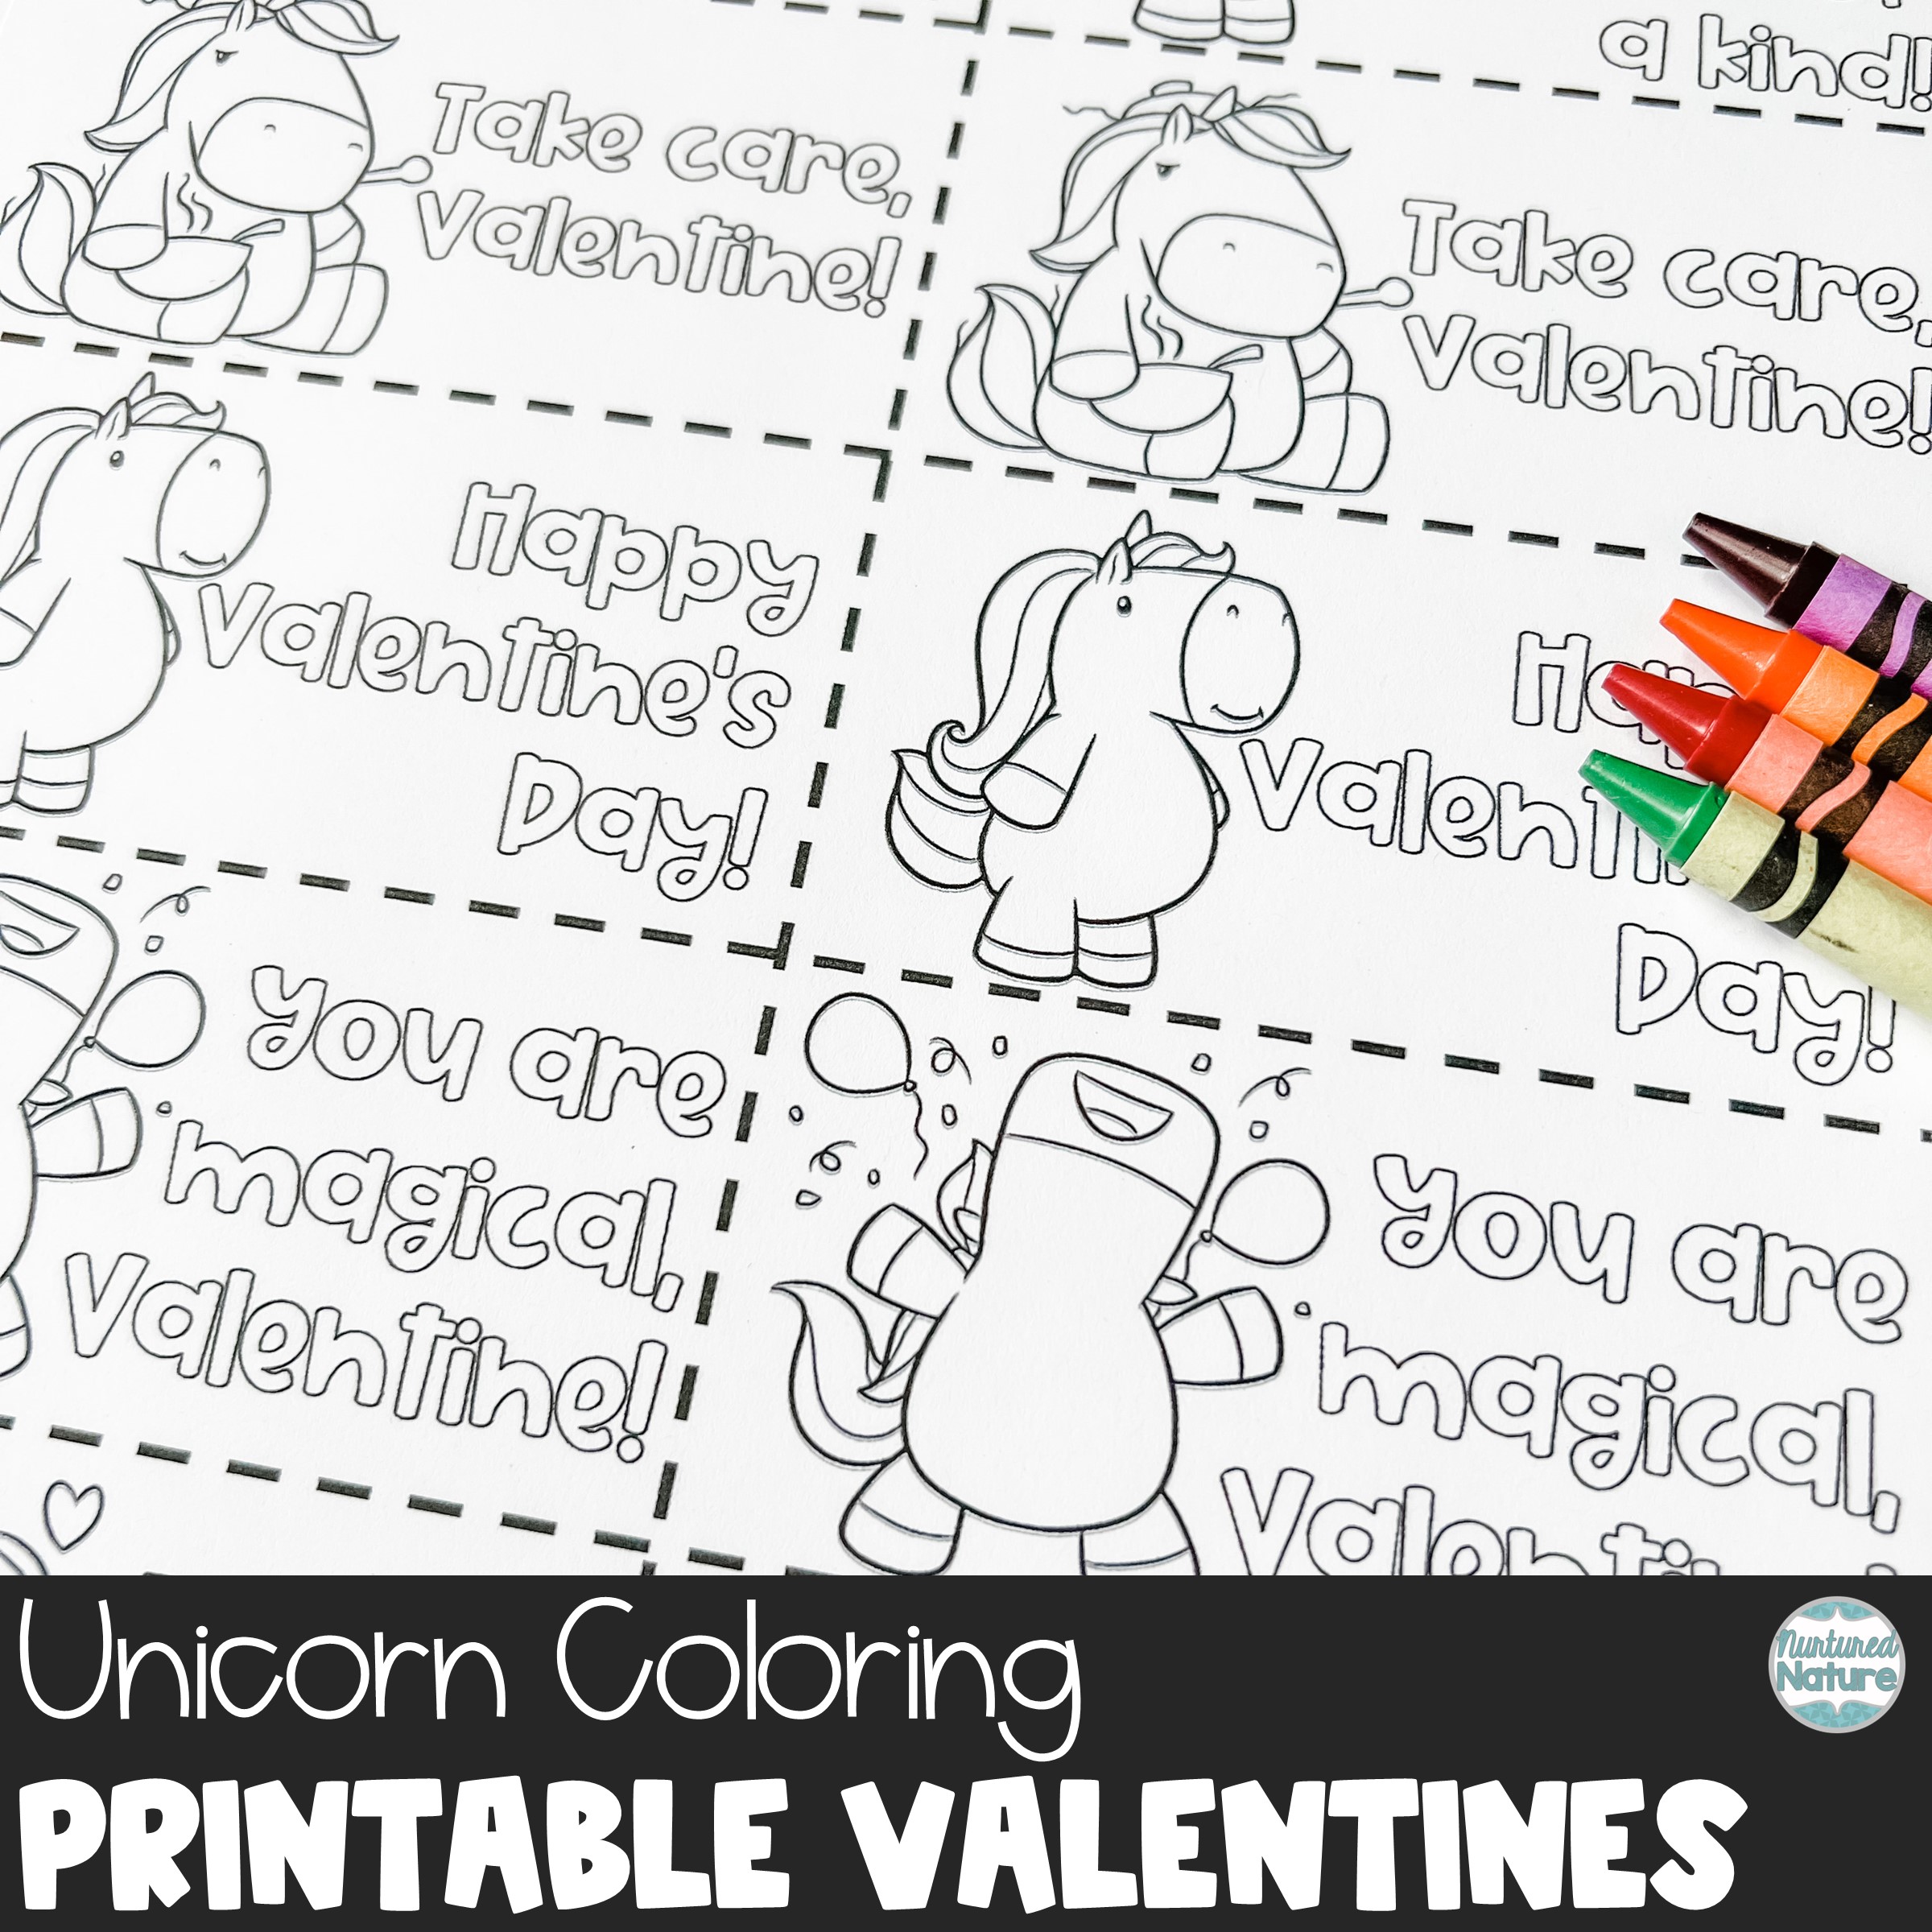 Unicorn coloring valentines day cards printable made by teachers